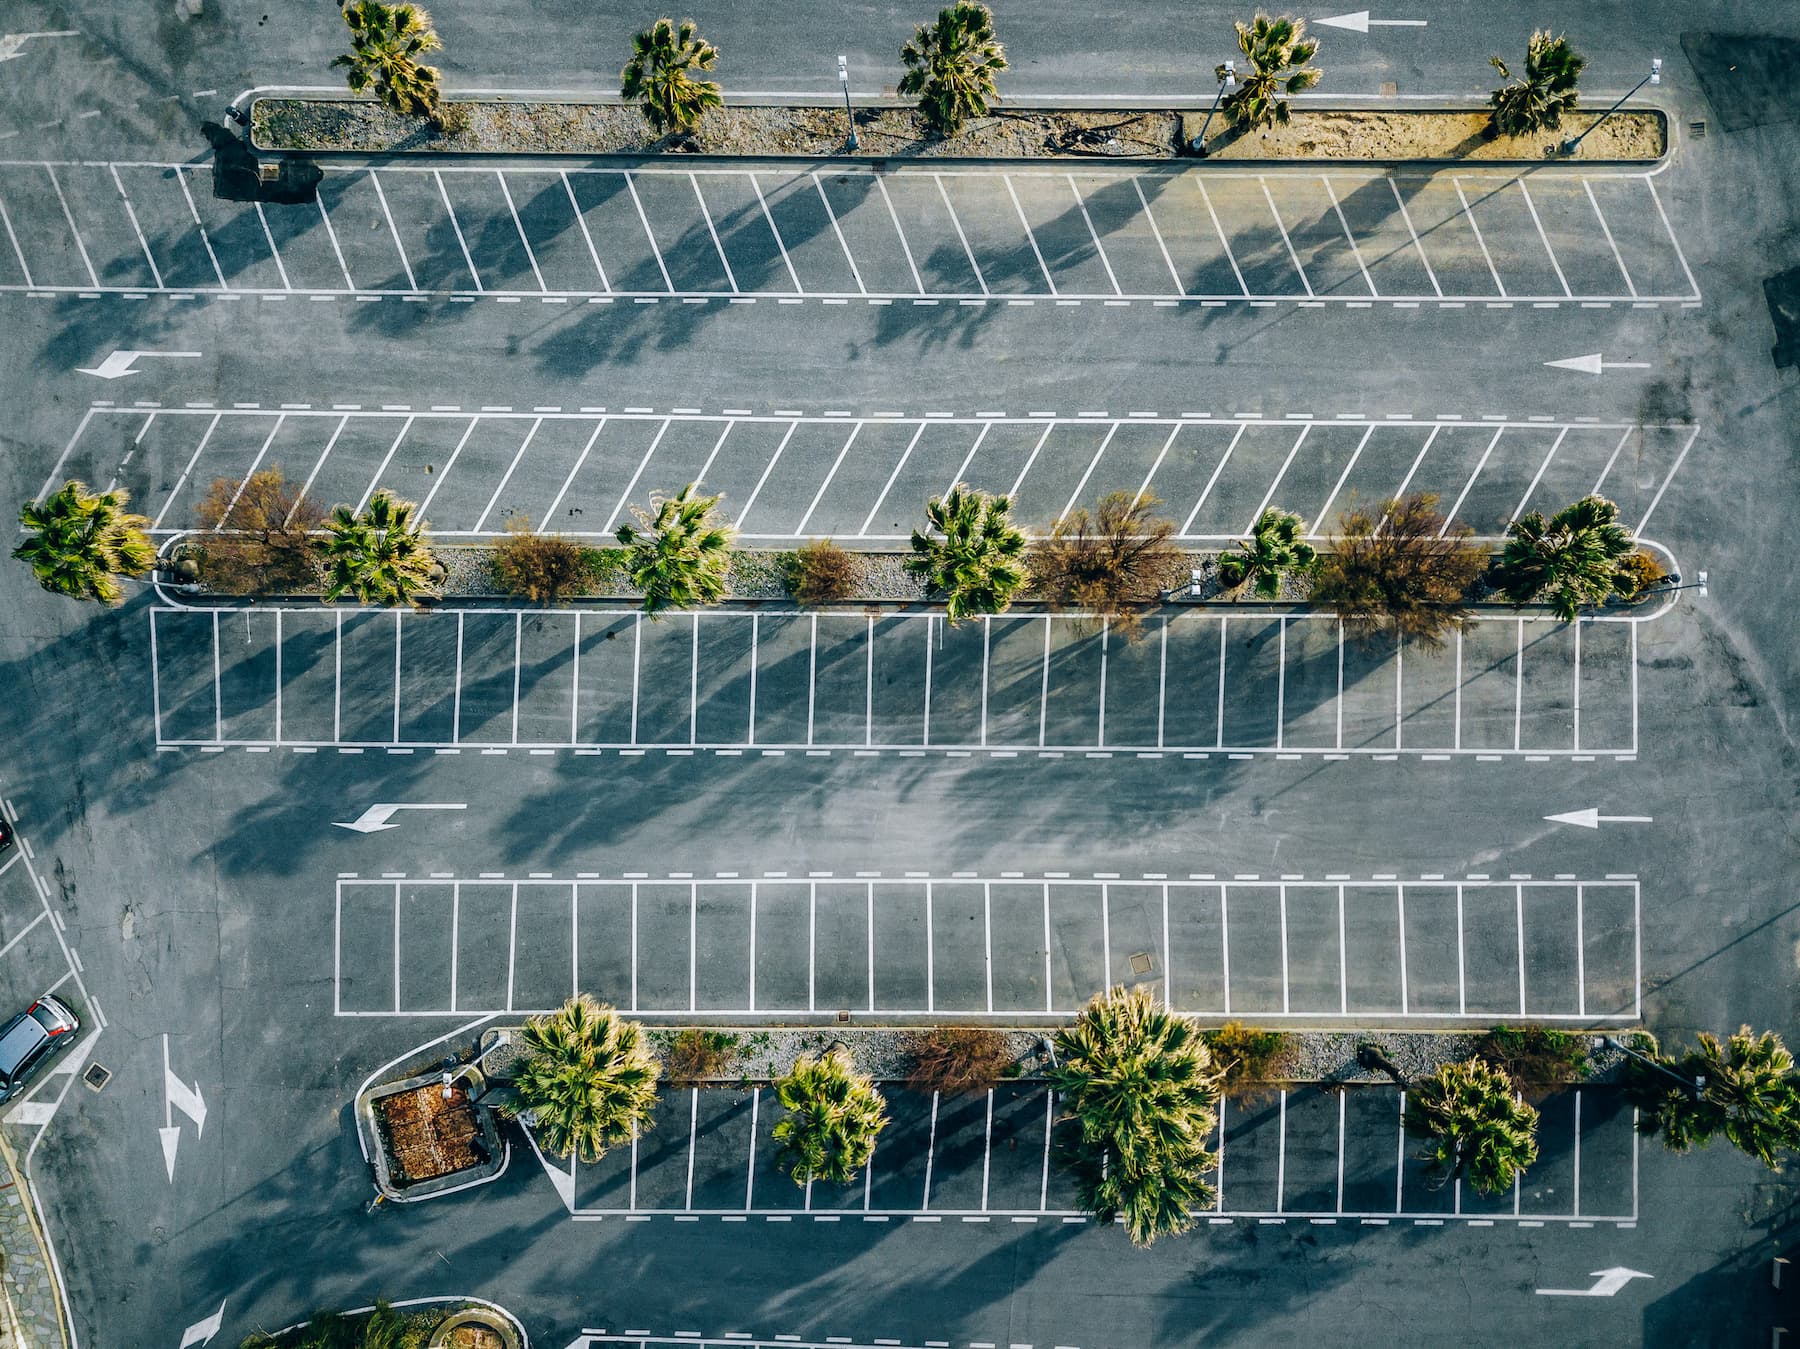 How can you Affordable Stripe a Parking Lot? Get the Exact Cost Now!